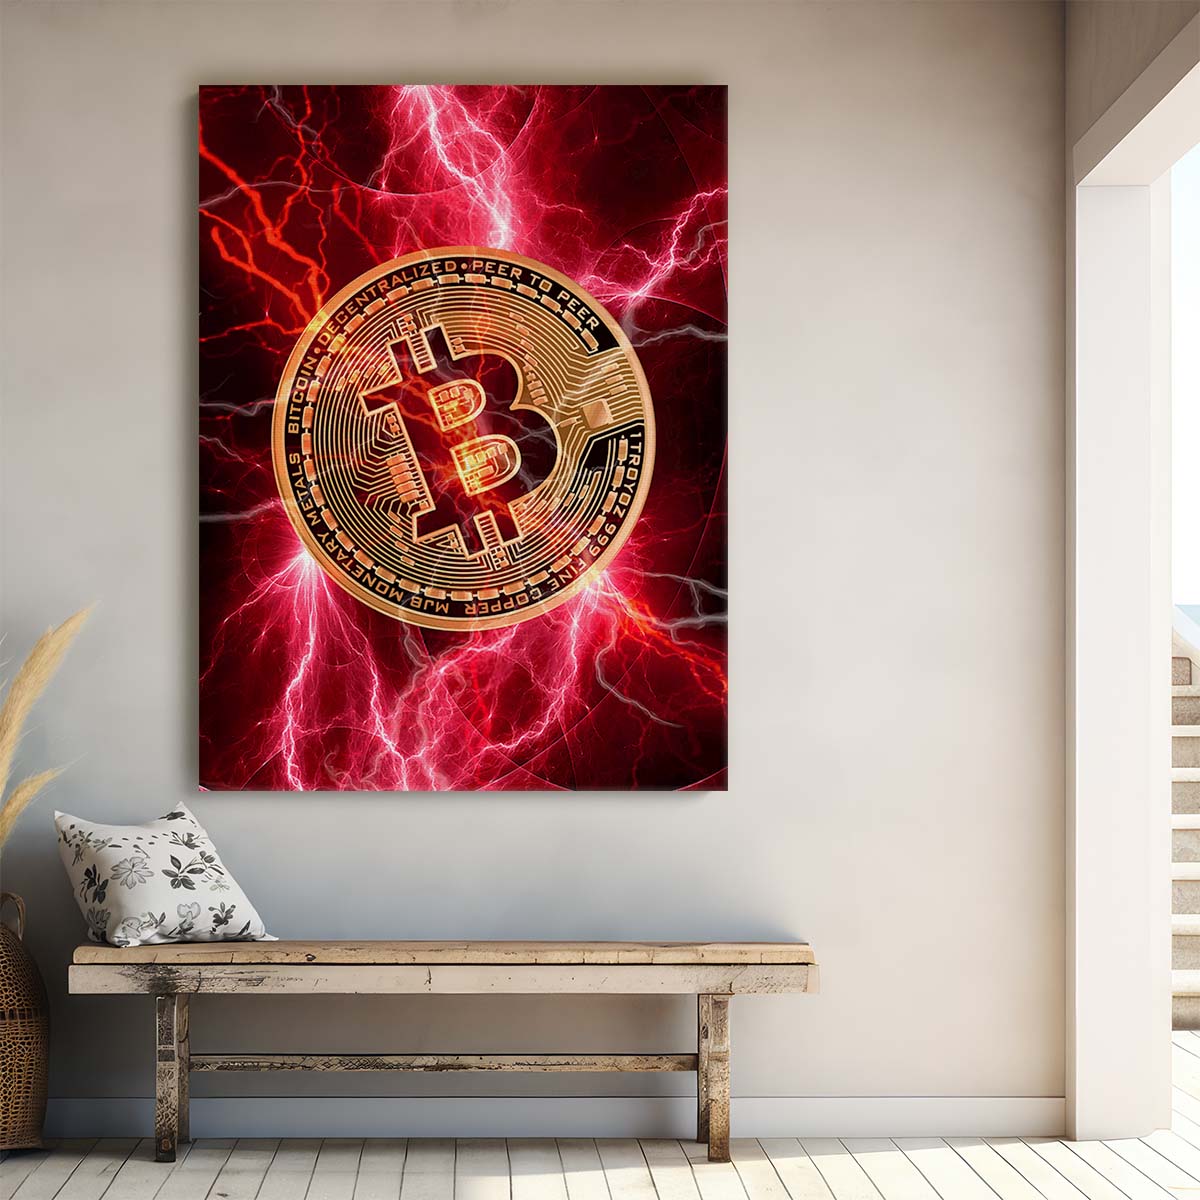 Thunderous Bitcoin Wall Art by Luxuriance Designs. Made in USA.